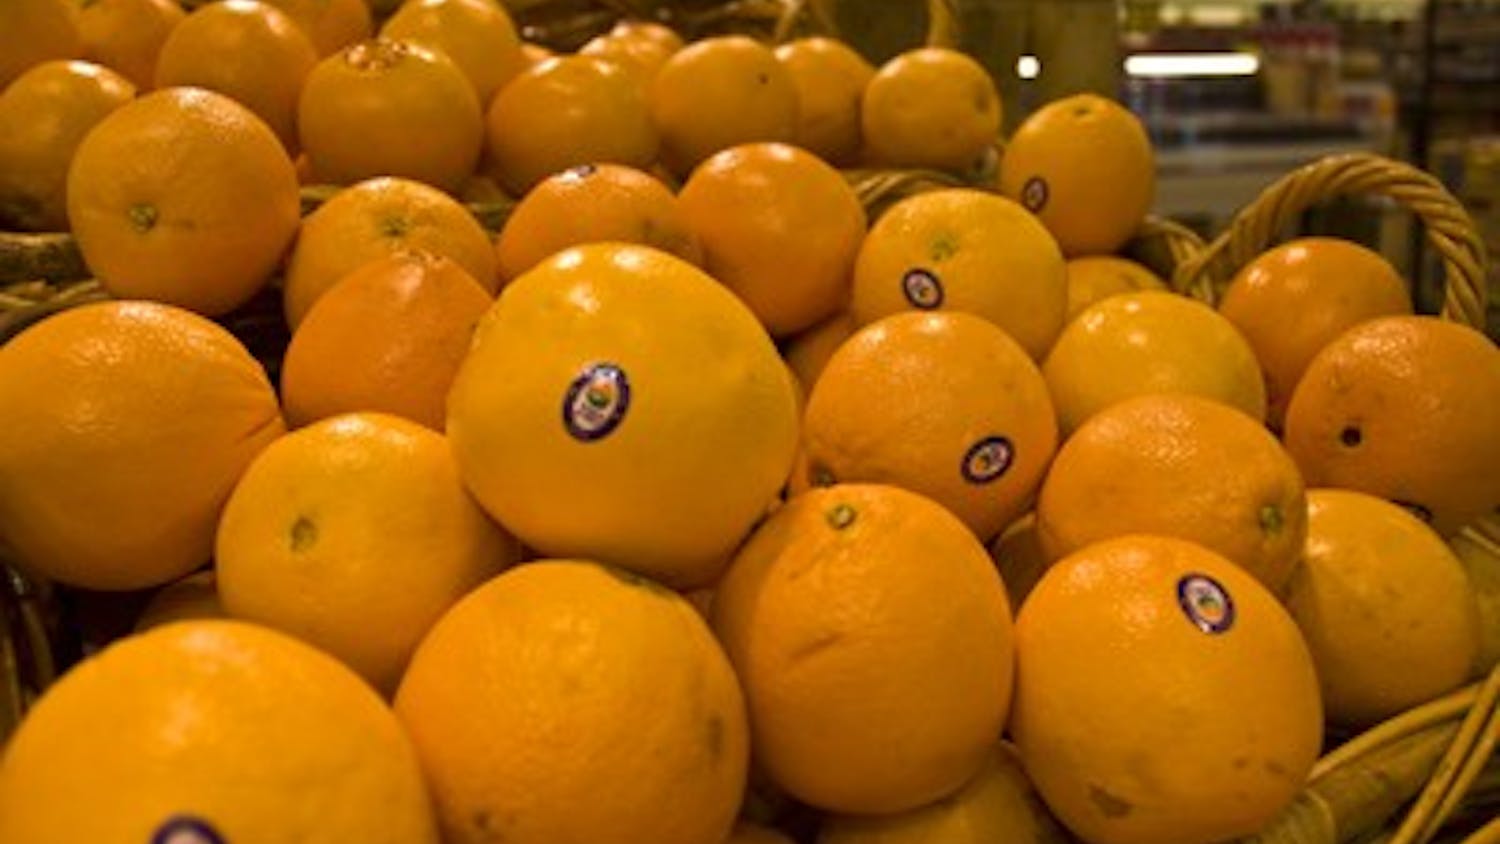 Baskets of Oranges sit on display at the Kroger Shopping Center on College Mall Rd. Oranges provide a source of vitamin C.